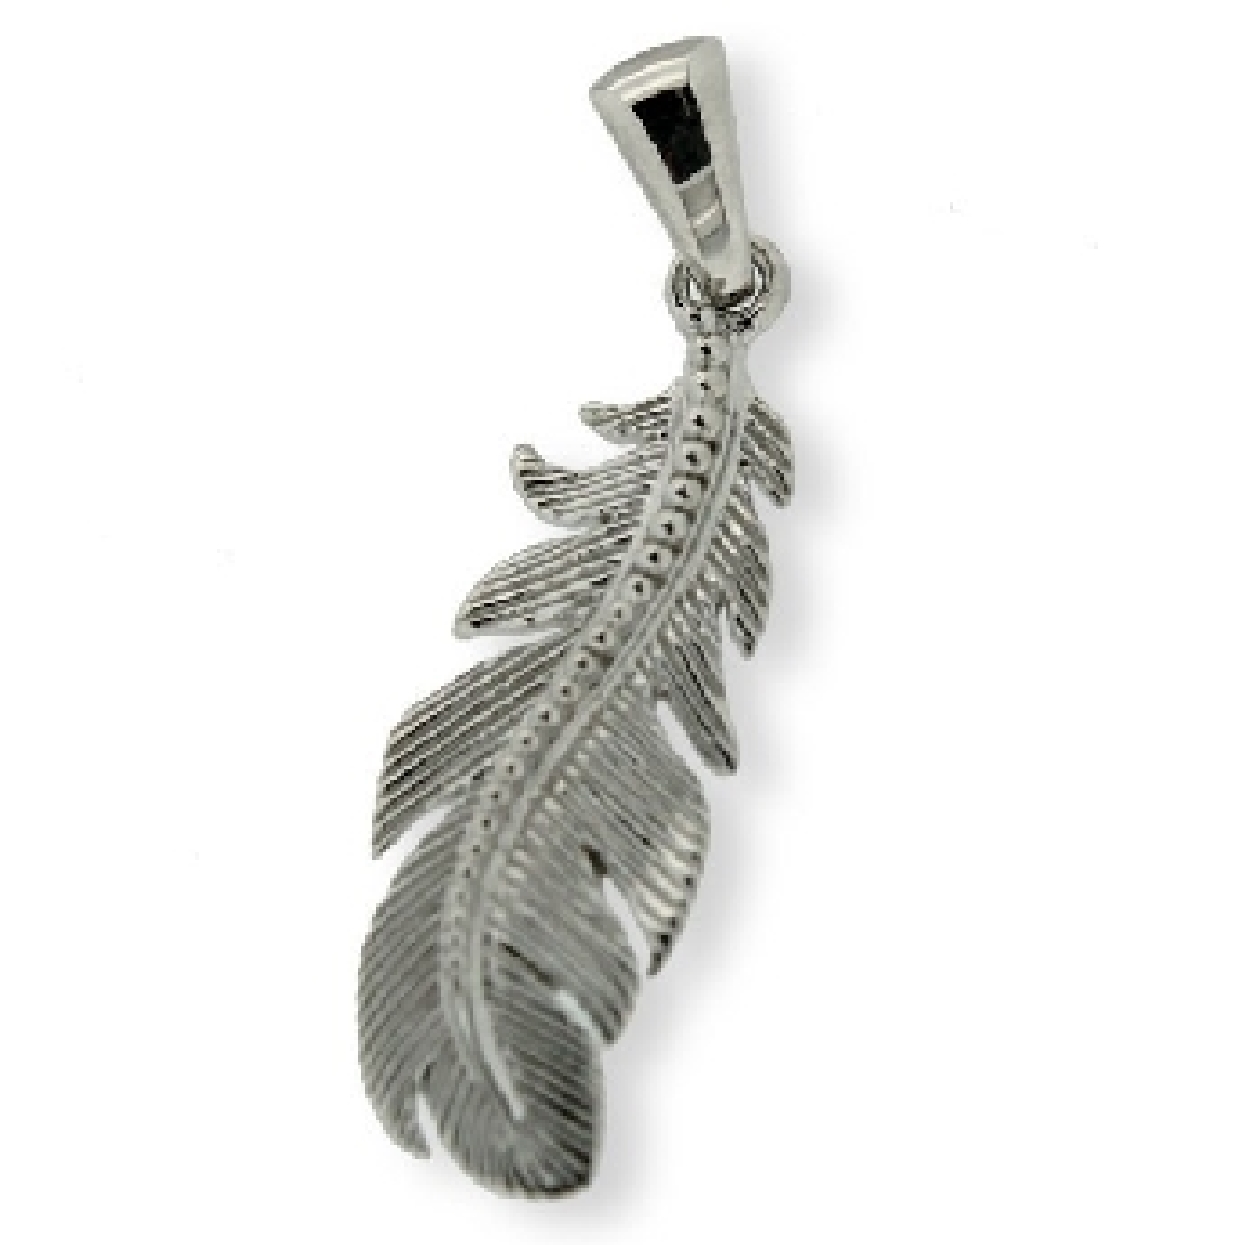 Sterling silver Courtyard Feather pendant
from the Southern Gates® Courtyard Series. P899.